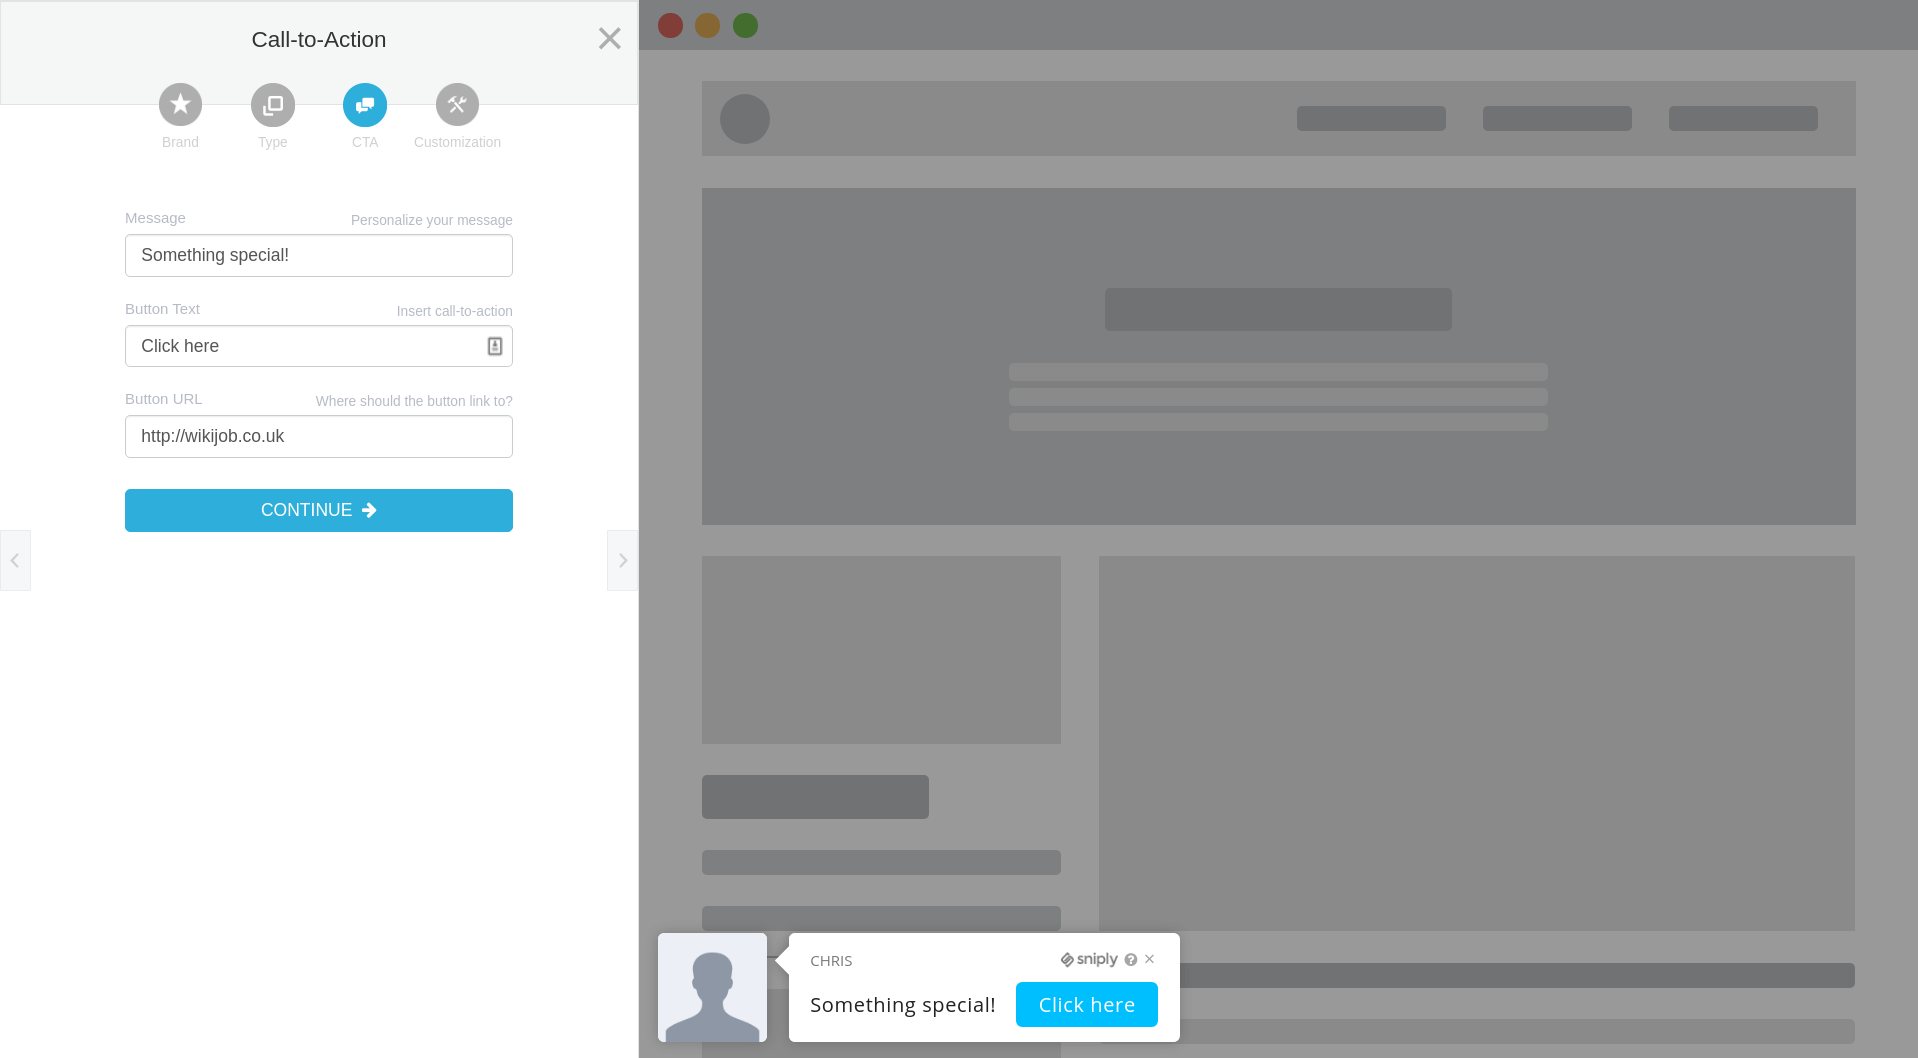 Snip.ly’s create link screen is a bit different to most, focusing on the call to action.